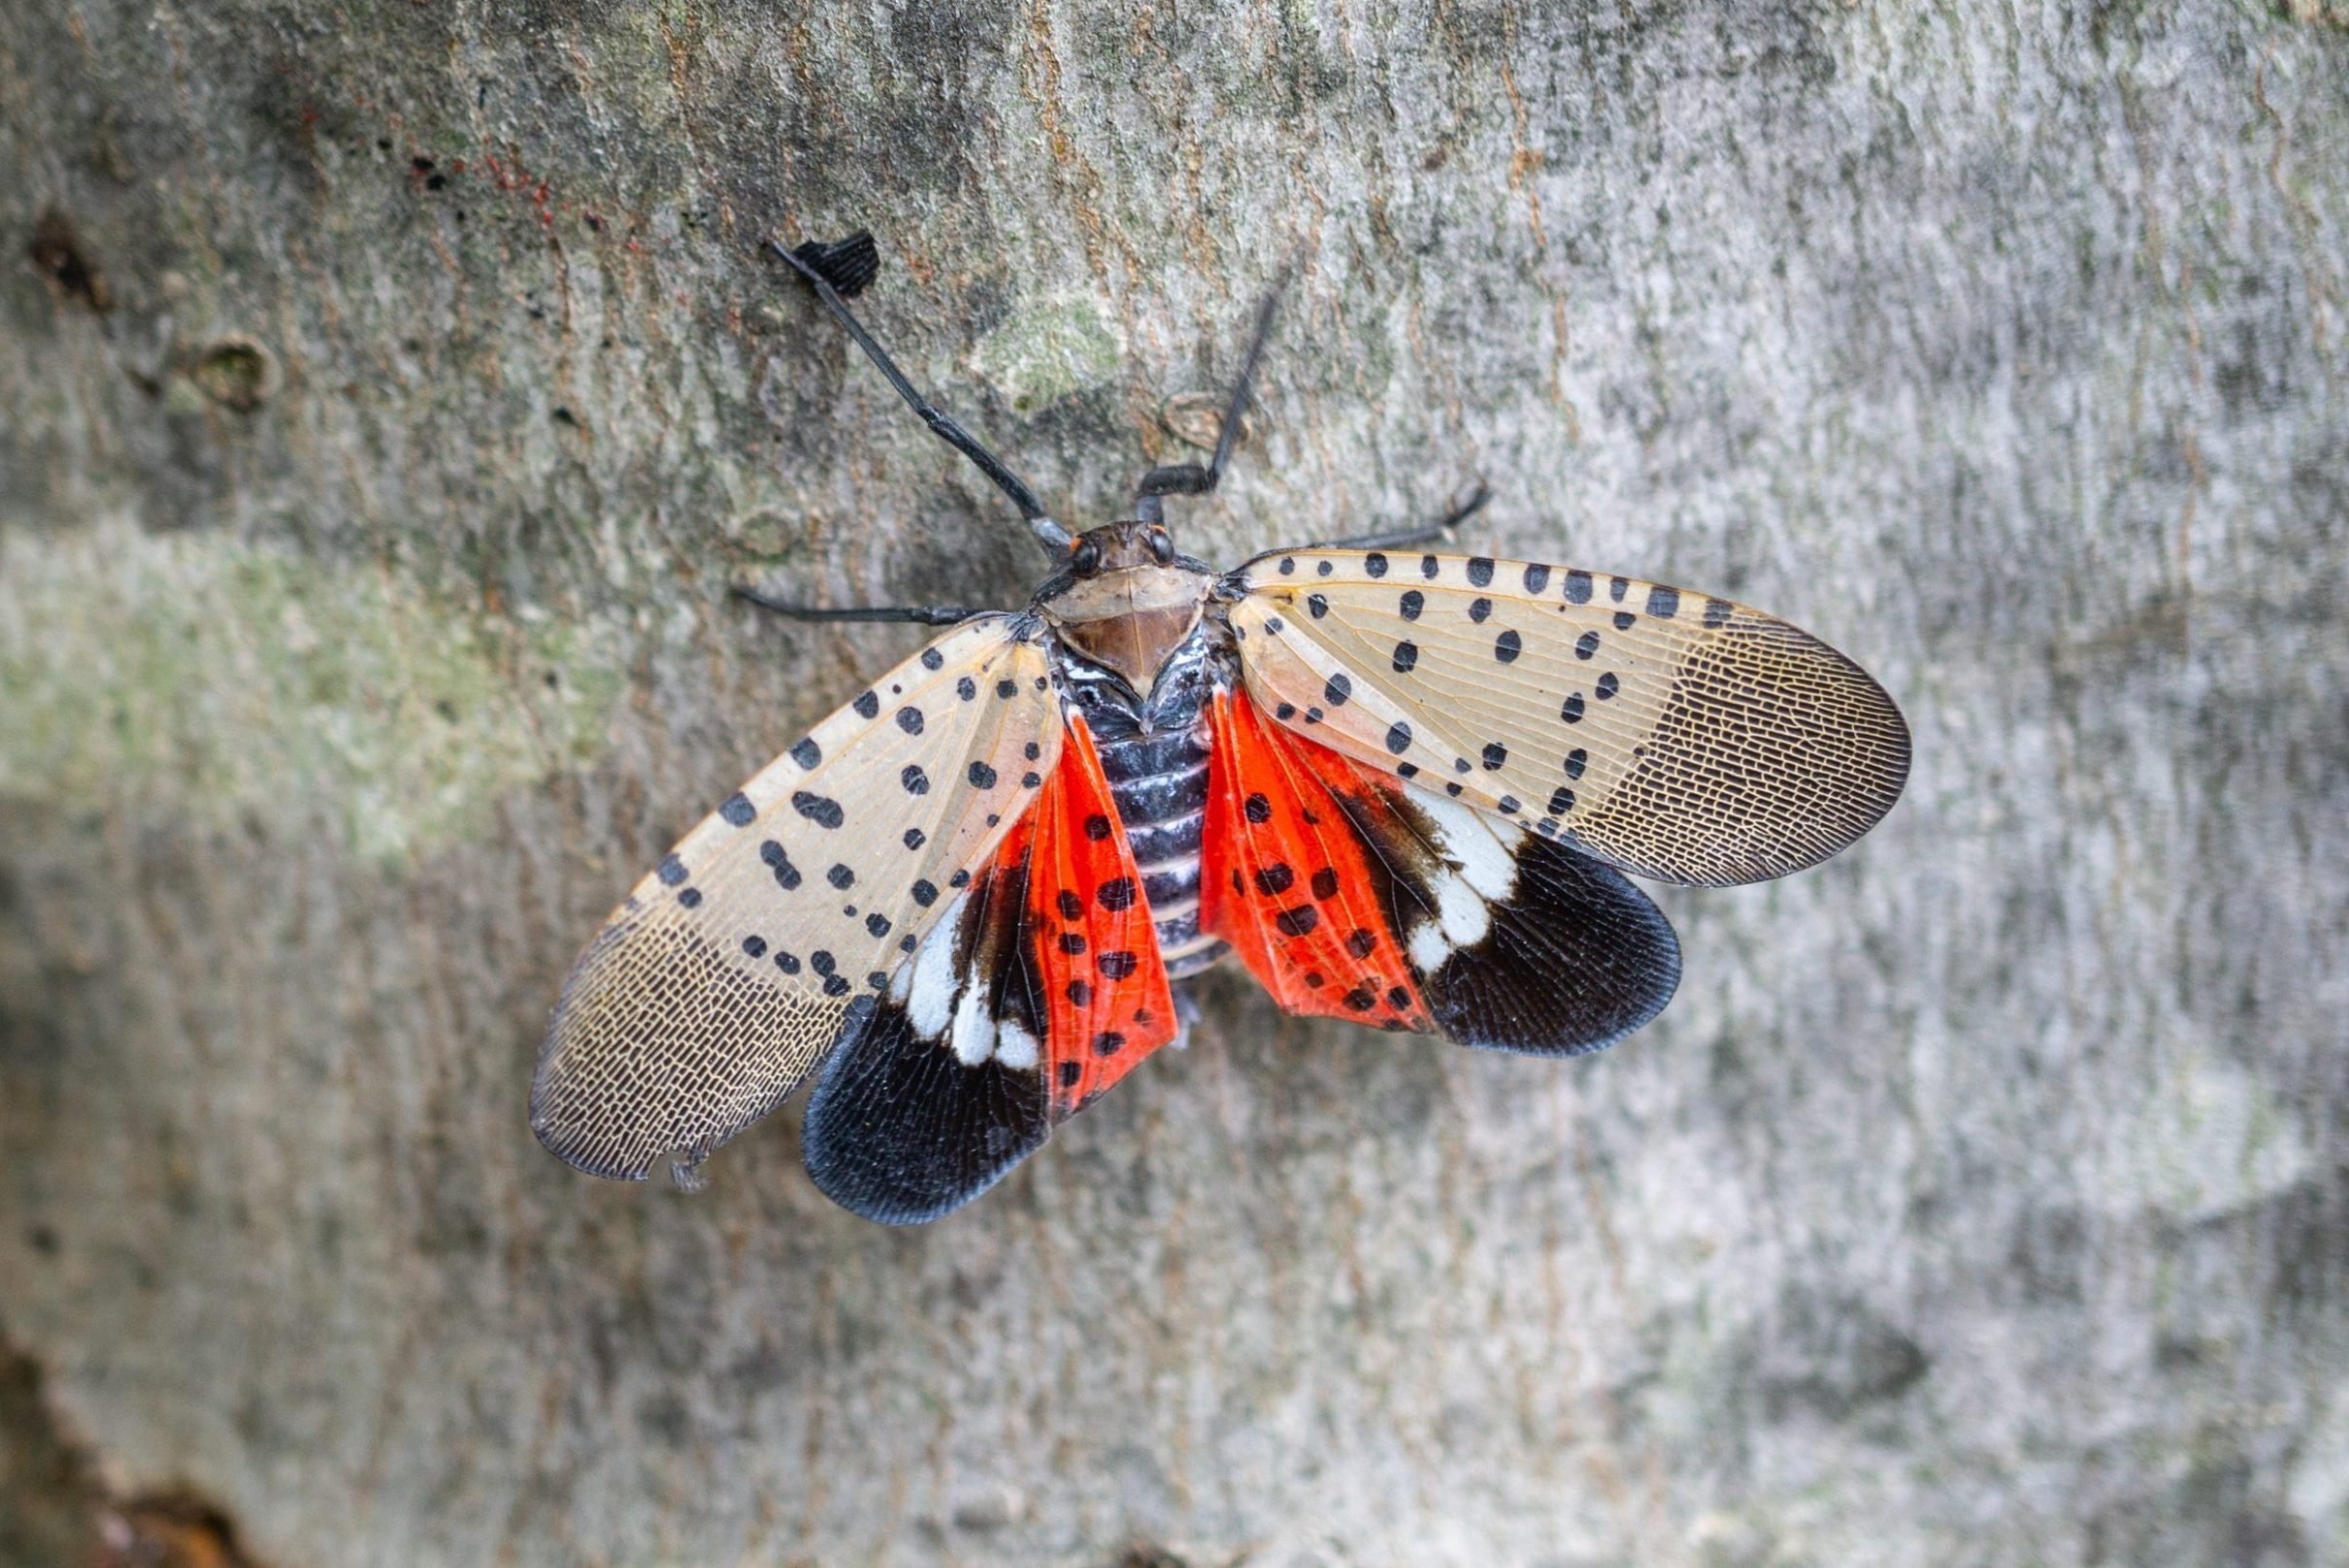 If You Find a Spotted Lanternfly in Your Yard, This Is What to Do